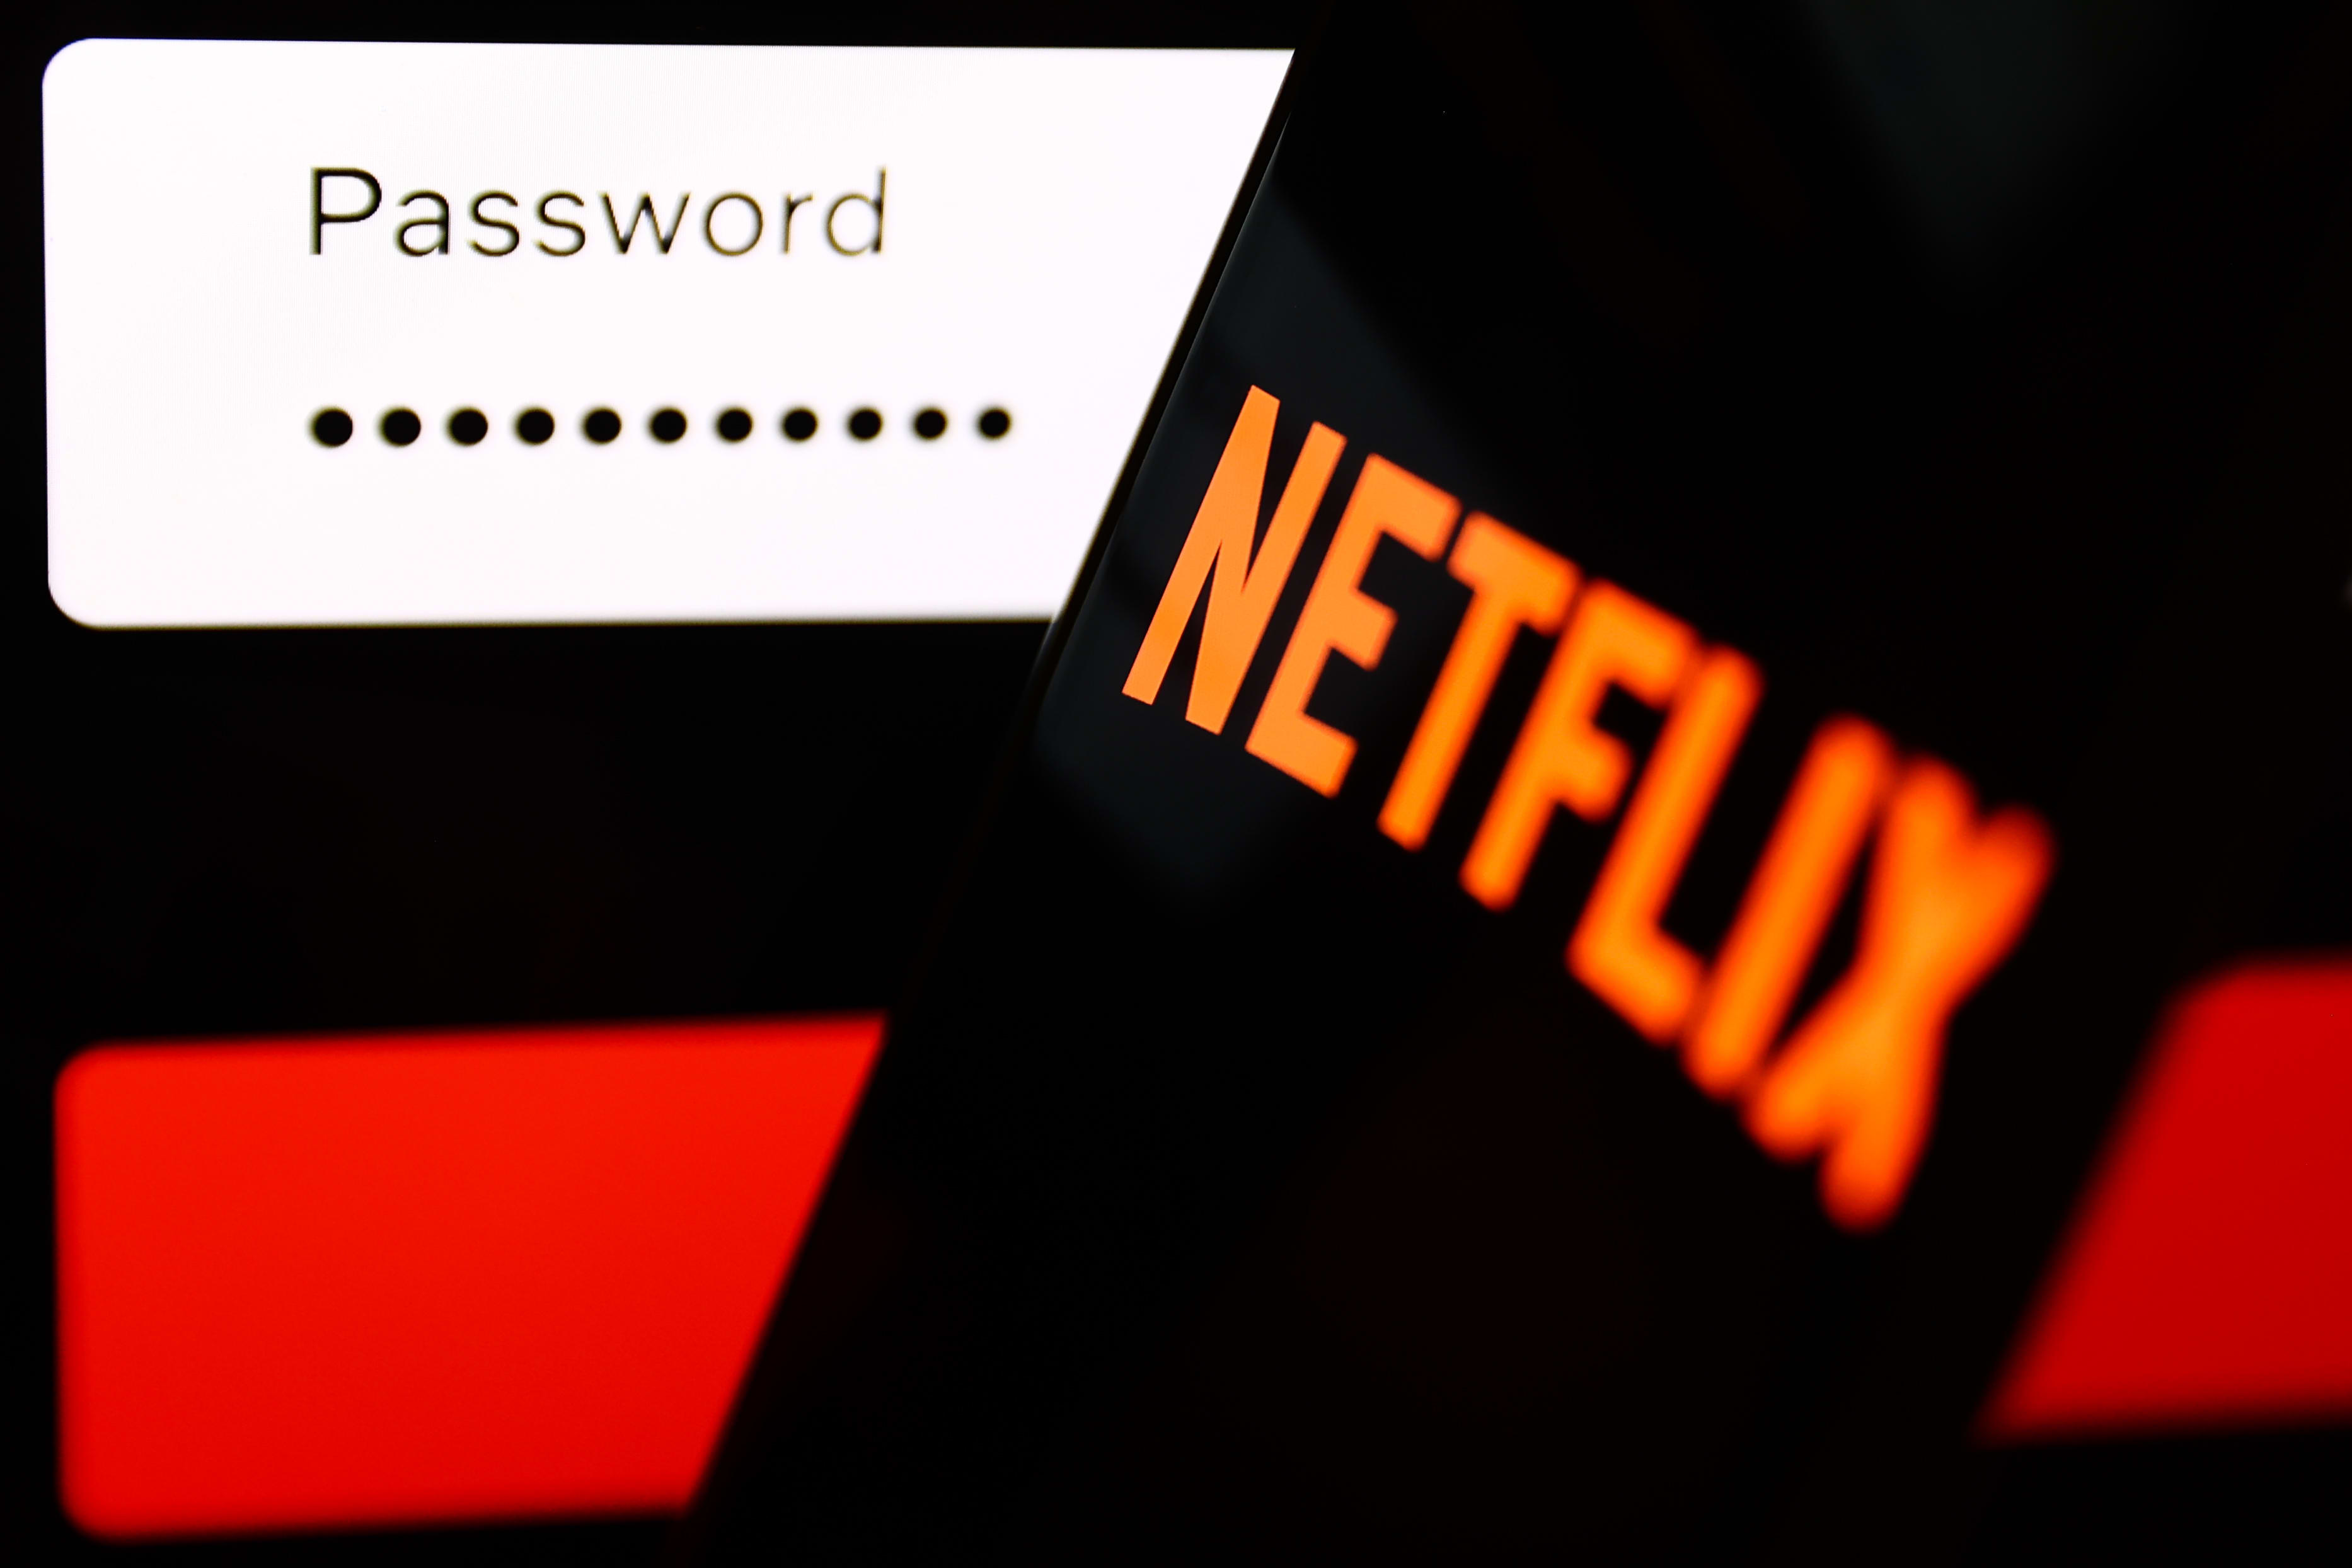 Netflix Password Sharing: Rules, Costs & More - Parade